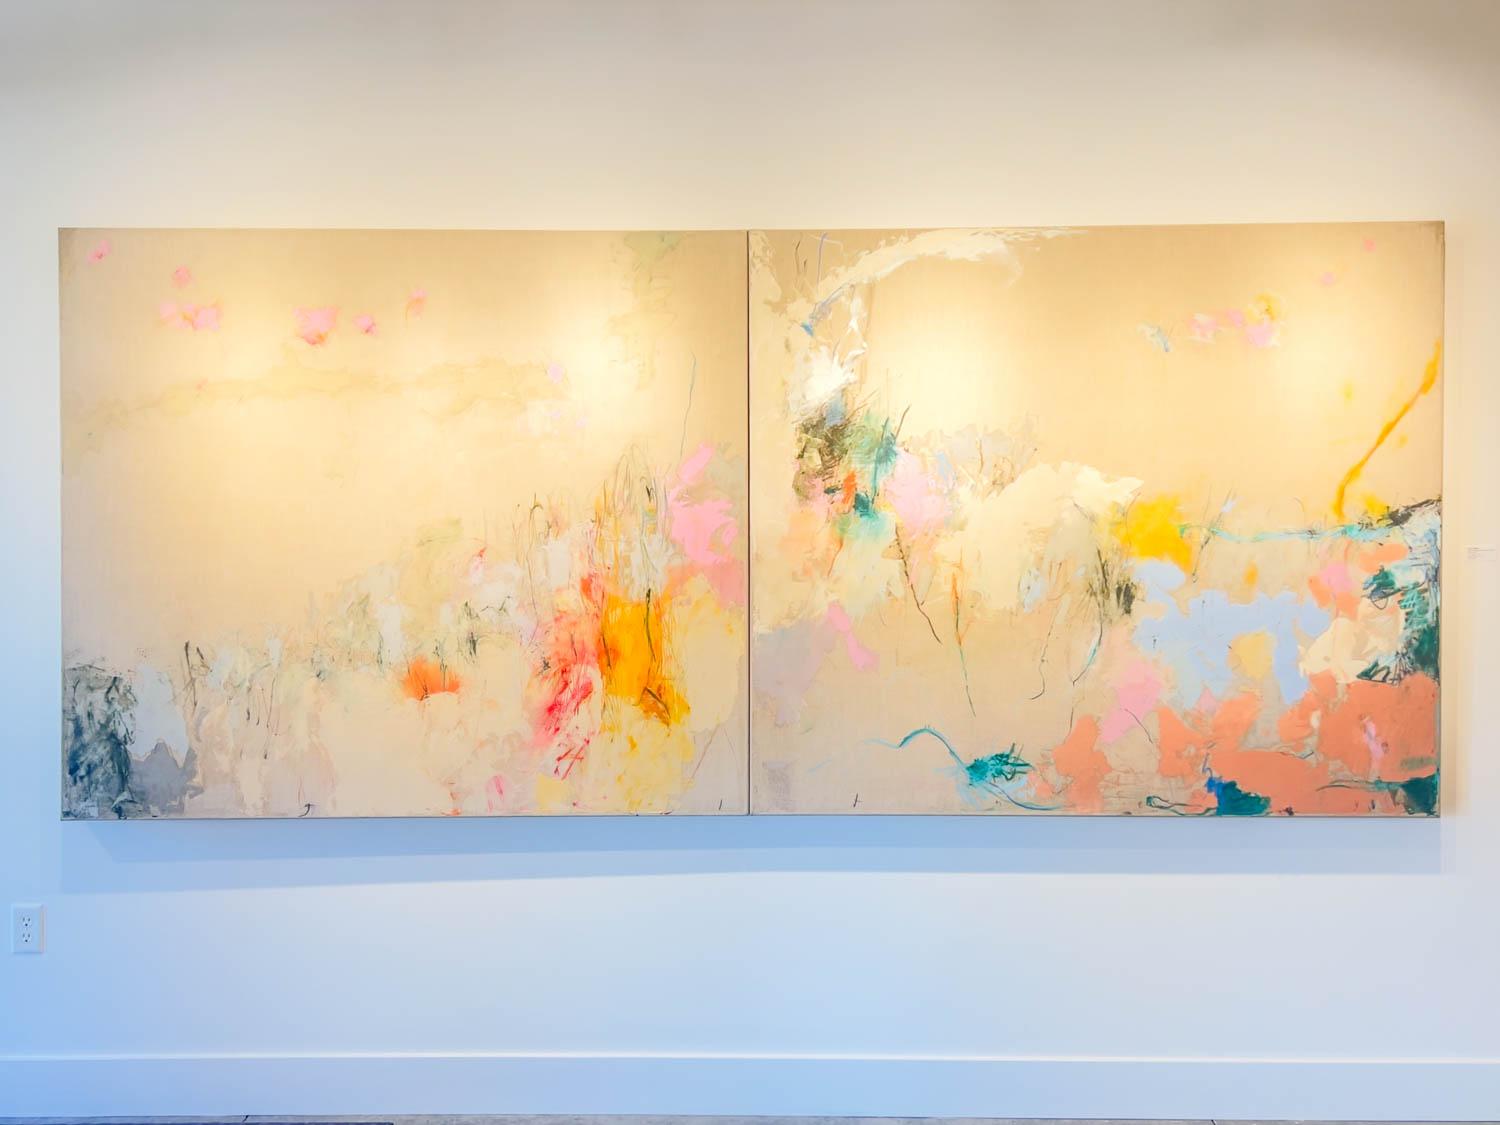 Chris Gwaltney Abstract Painting - Howls Restrained by Decorum - Large Abstract Oil Painting Diptych 